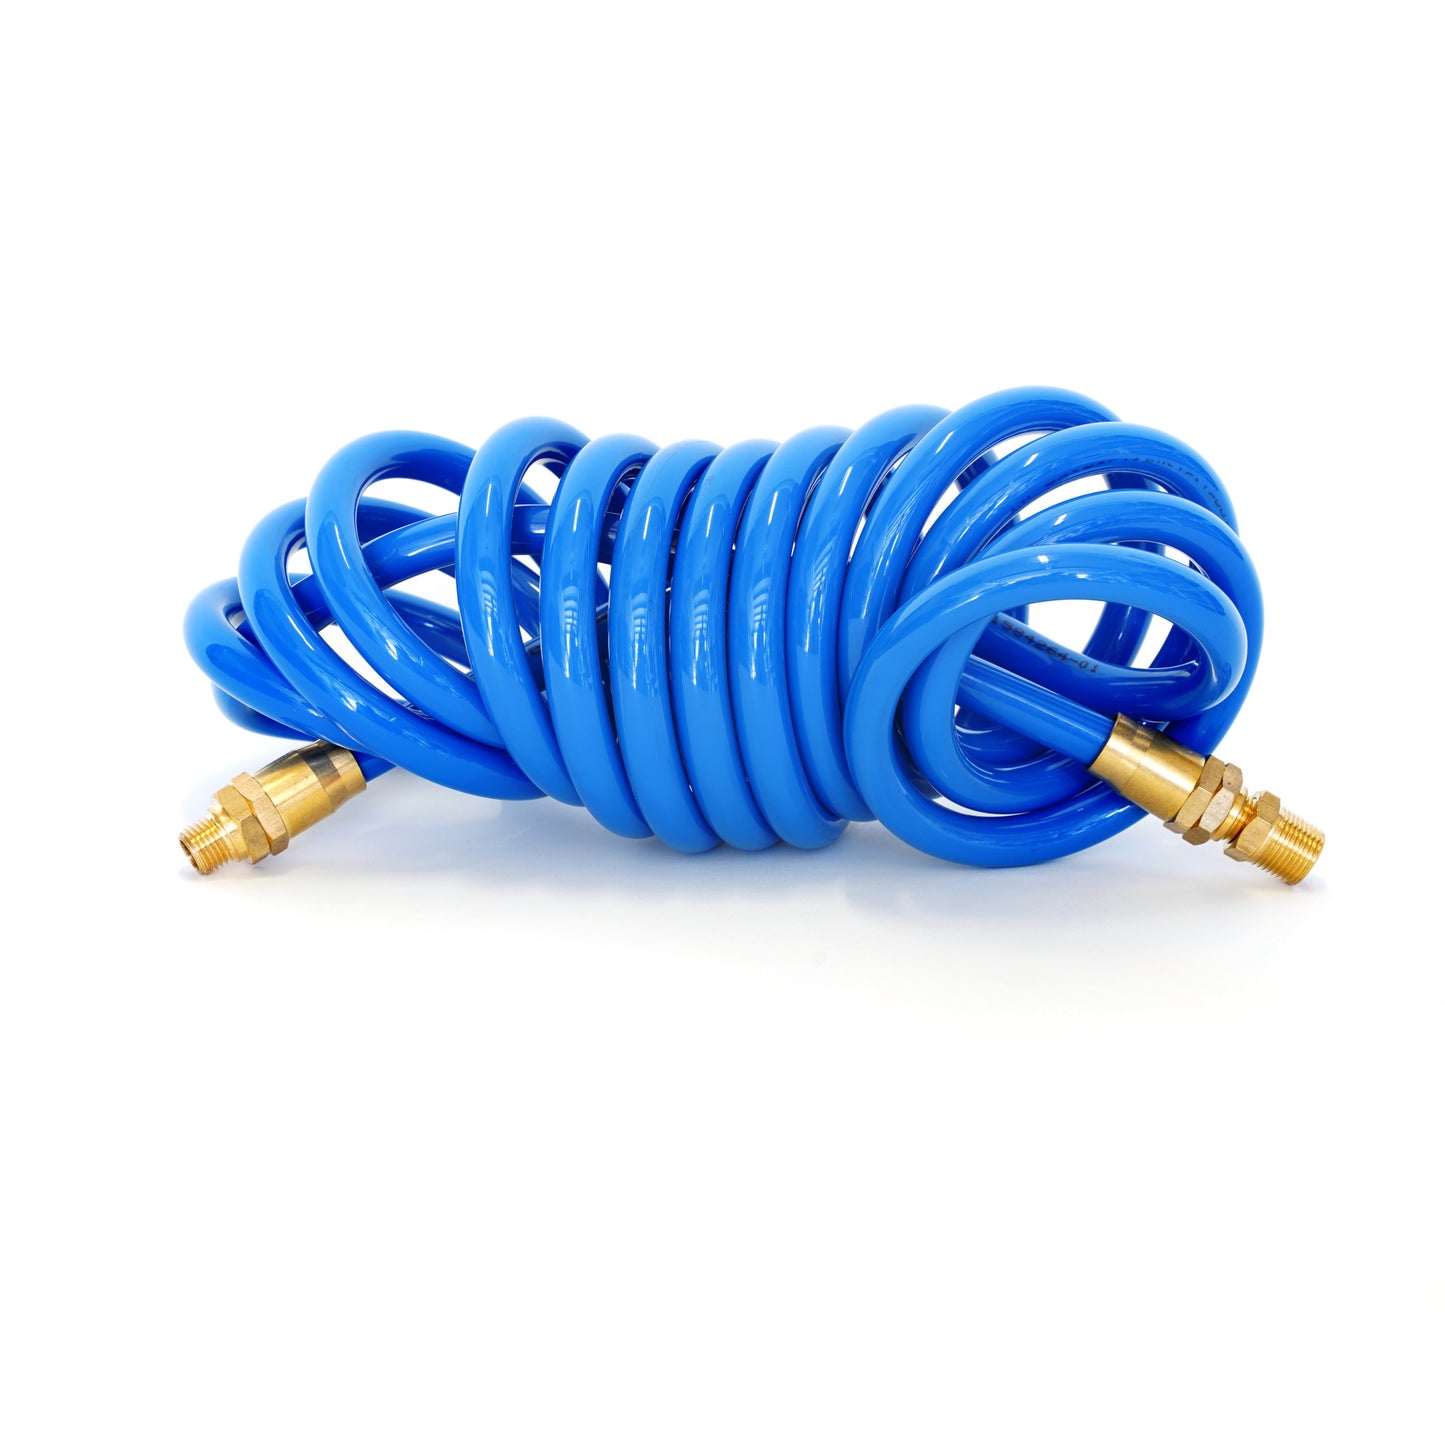 15-Foot Coiled 3/8-Inch ID Air Hose with 1/4-Inch NPT Brass Fittings